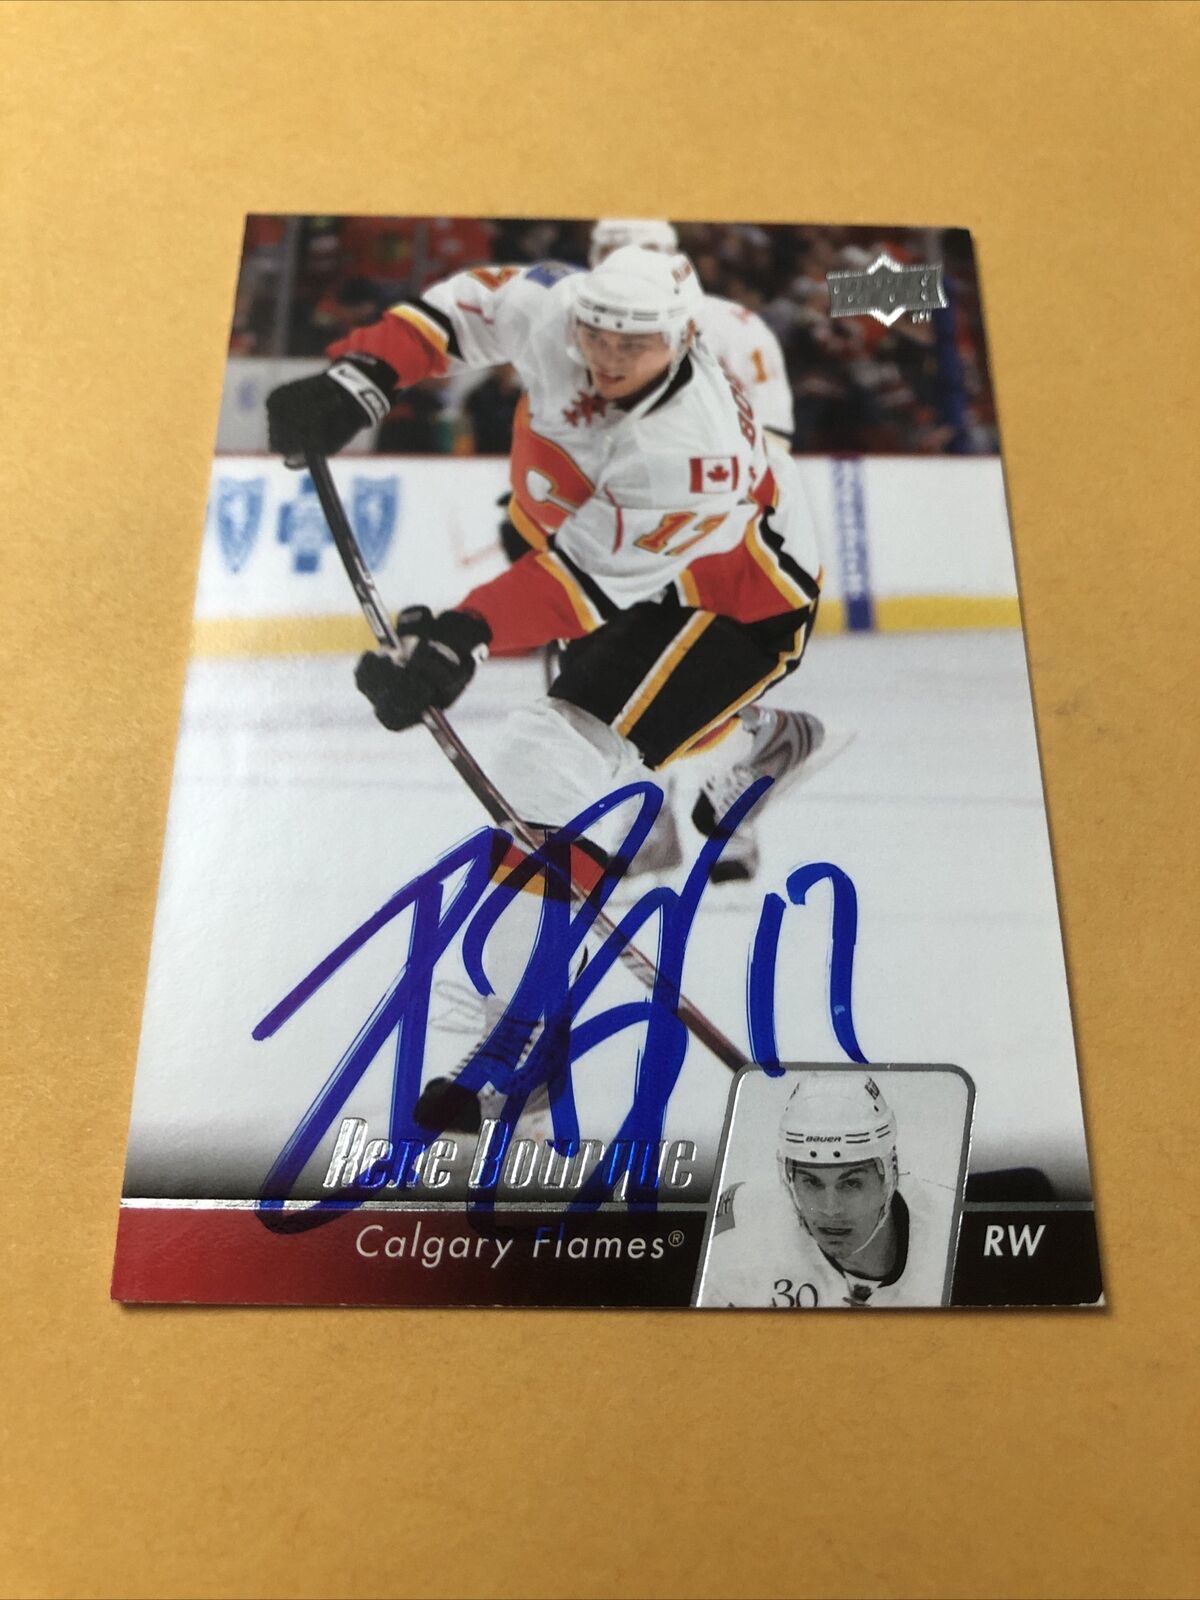 Rene Wholesale Bourque signed Flames Card Calgary Max 66% OFF